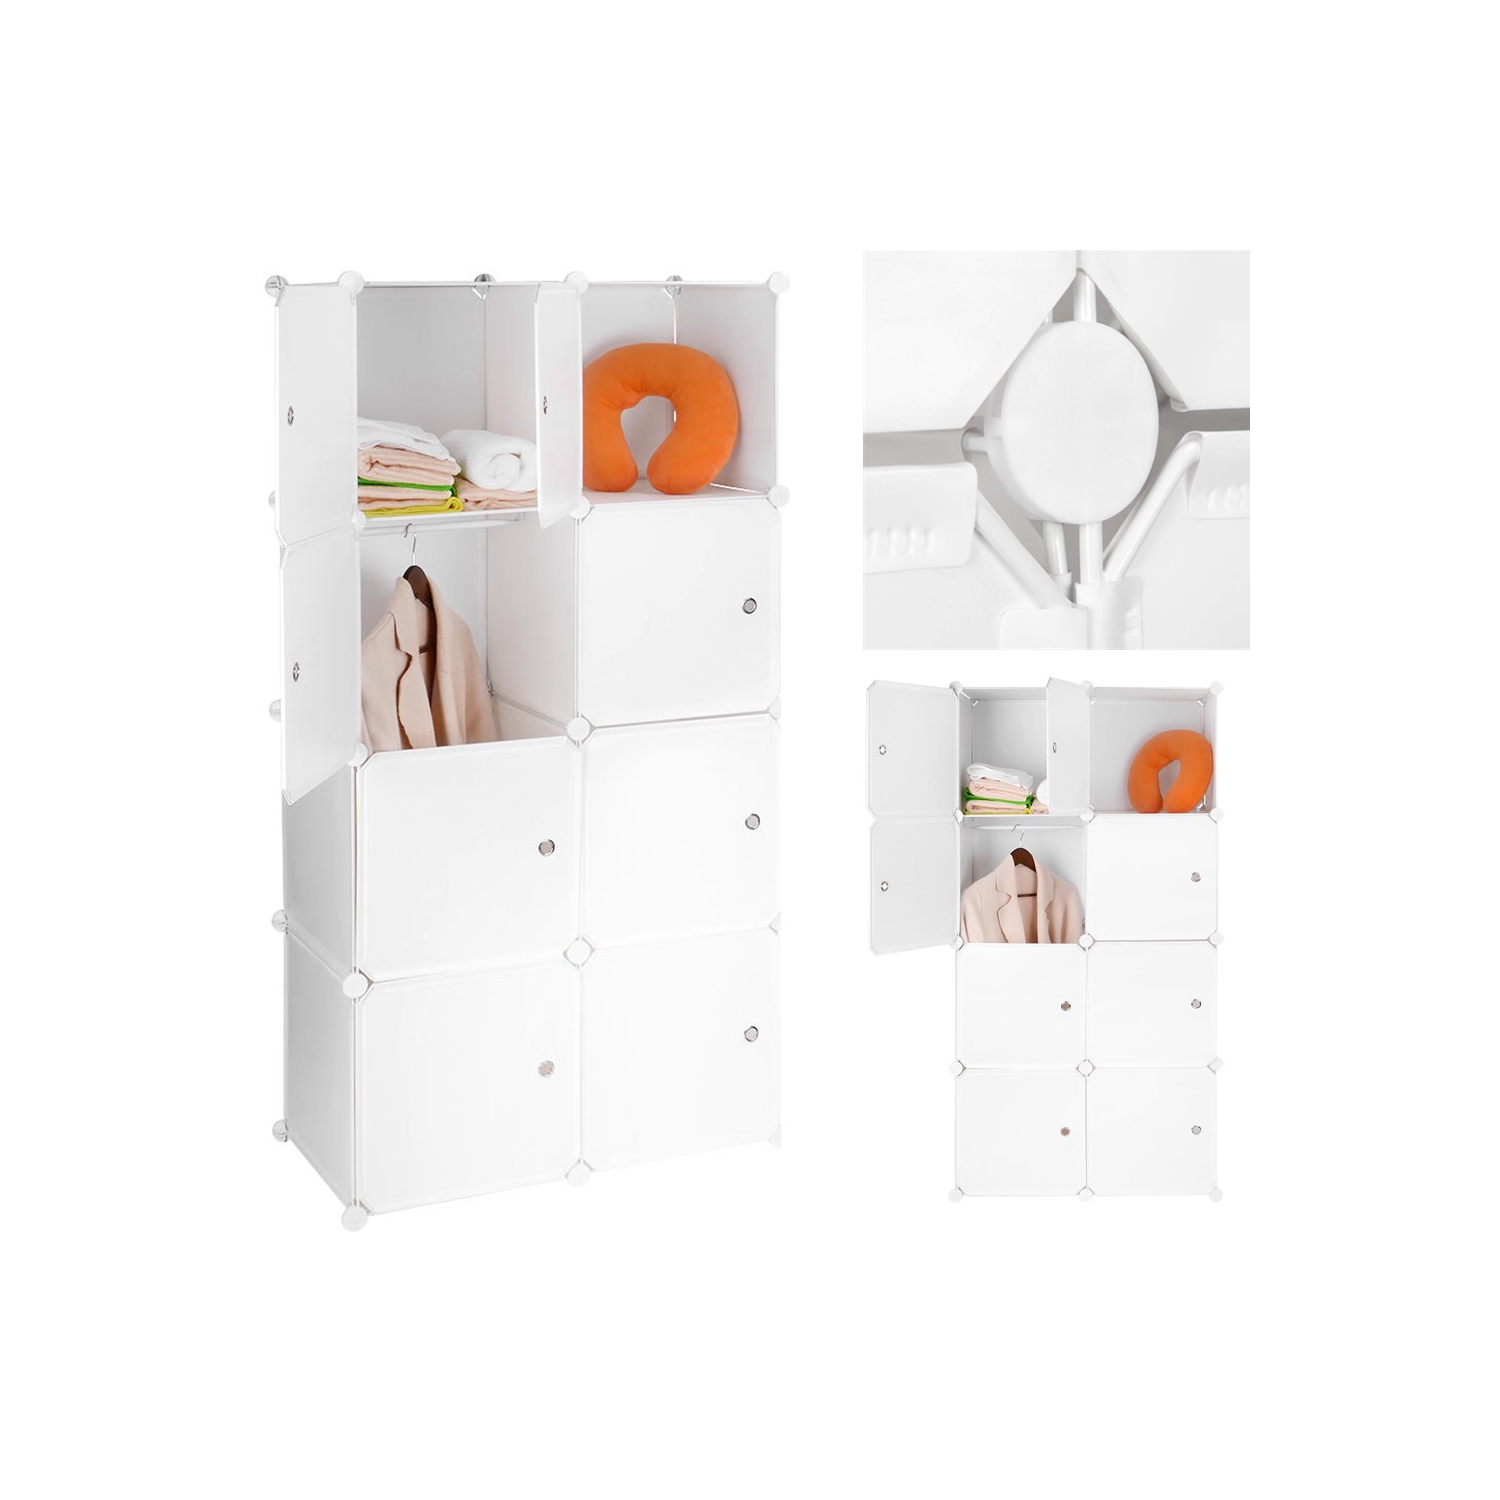 8 Cube DIY Portable Wardrobe Closet, Bedroom Storage Cube Organizer with Doors for Hanging Clothes